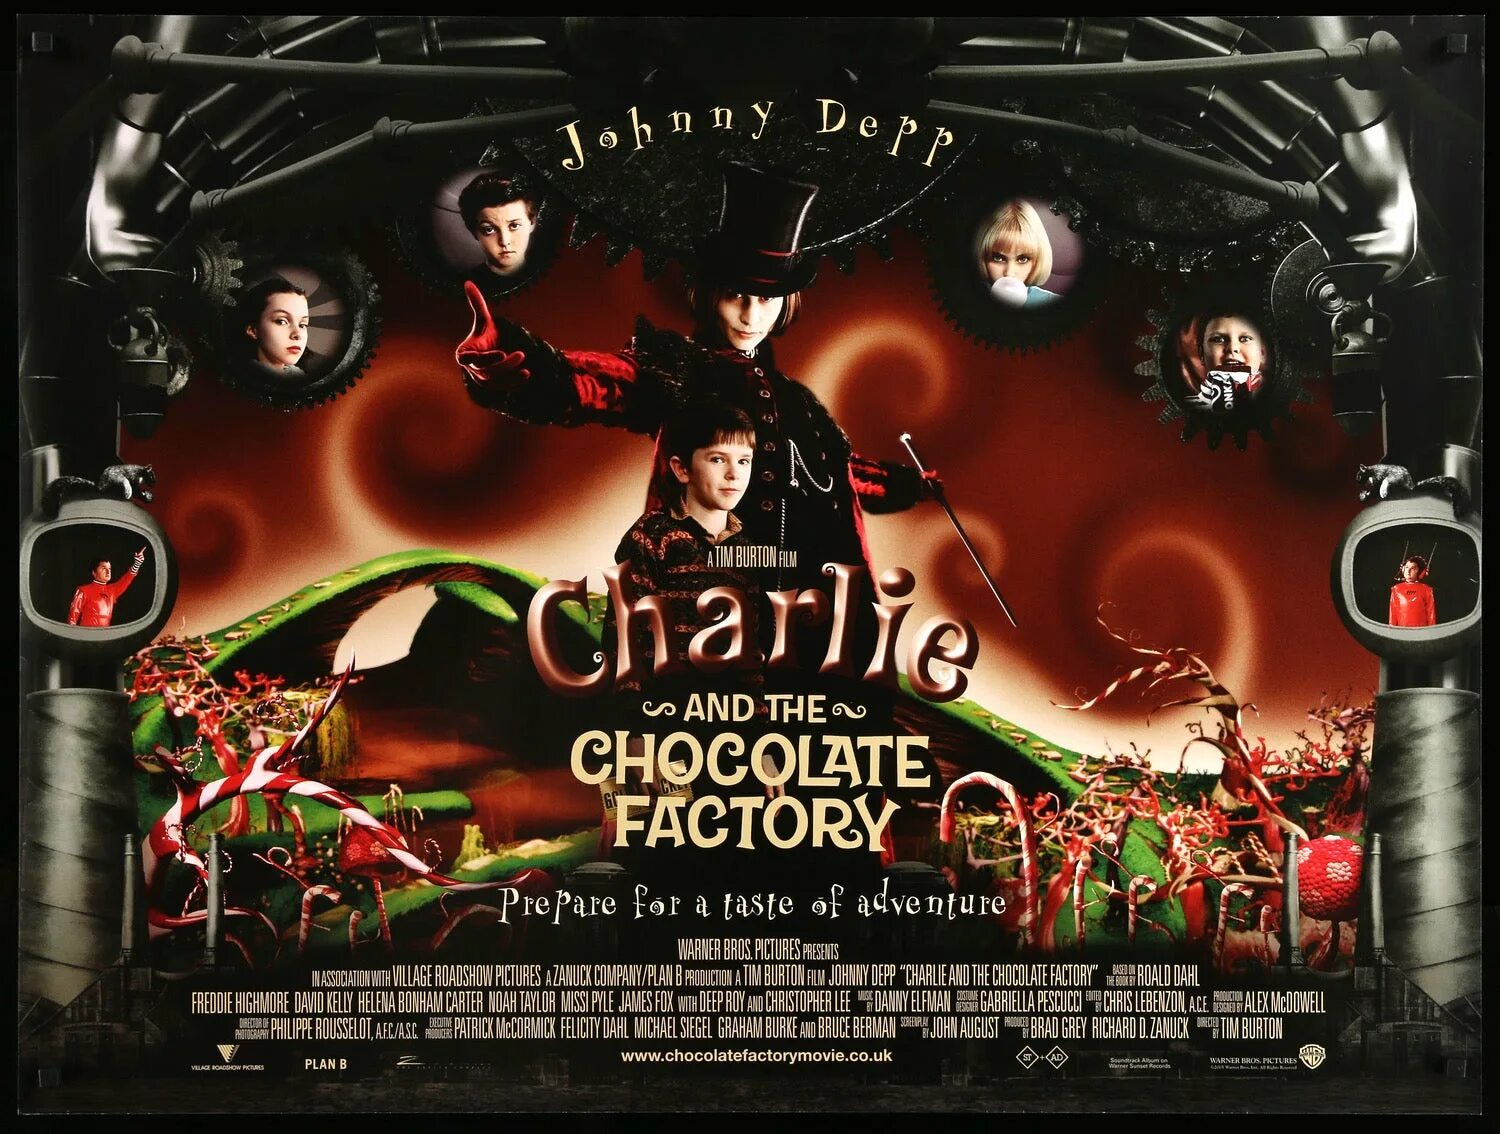 Charlie and the Chocolate Factory 2005 poster. Charlie and the Chocolate Factory Постер. Charlie and the Chocolate Factory 2005 обложка. Чарли и шоколадная фабрика афиша. Шоколадная фабрика краткое содержание